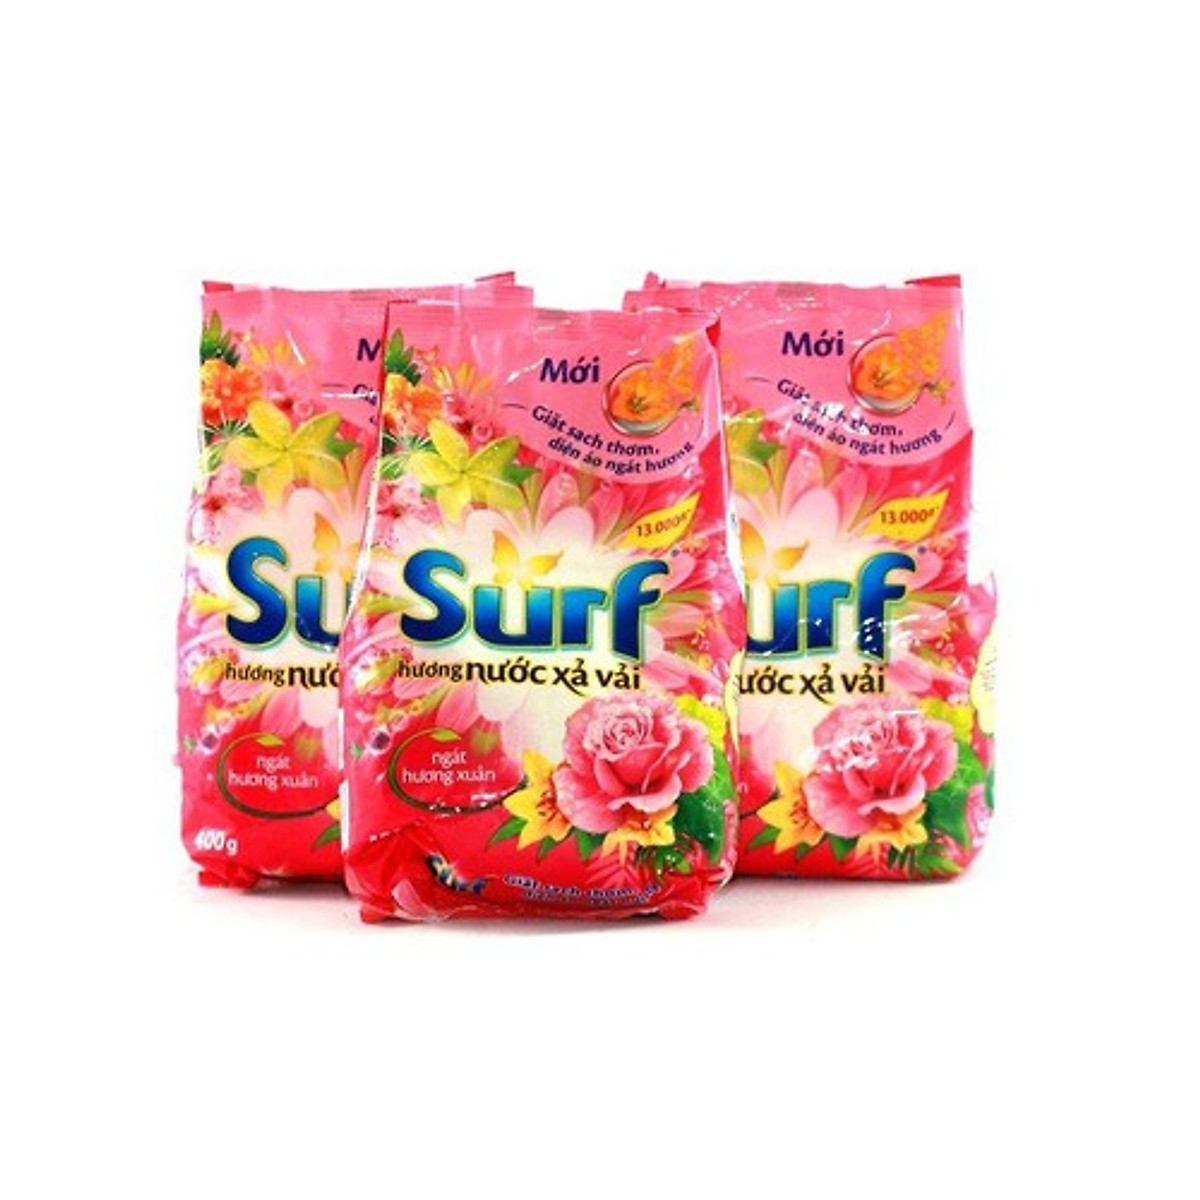 Surf Sping Guide 400G